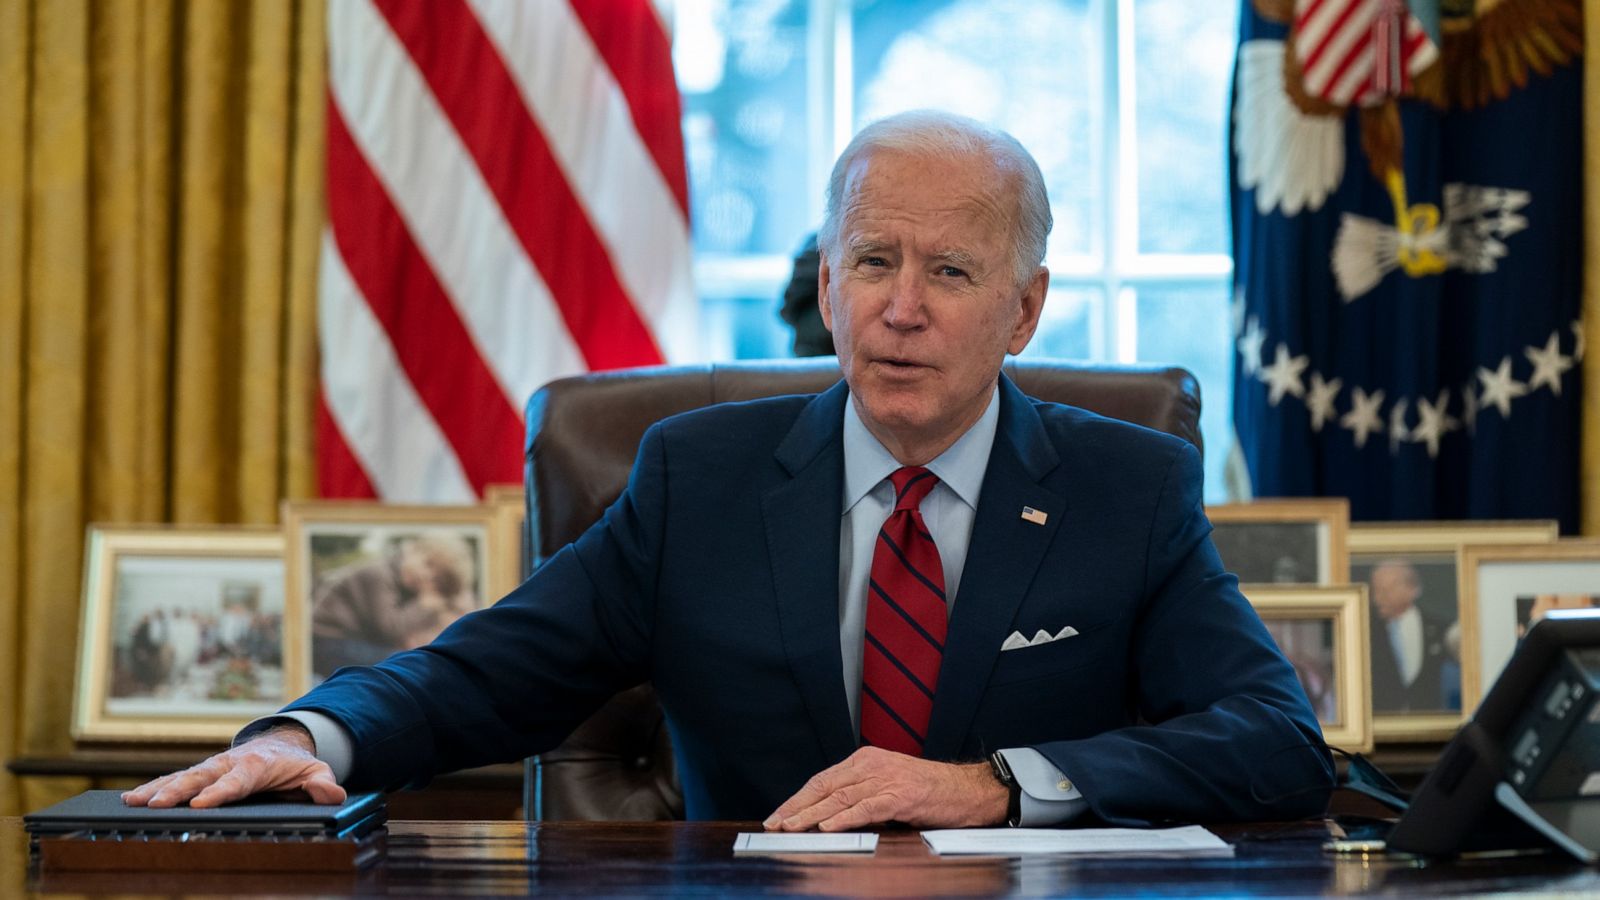 D.C. United pledges supports for reproductive rights as President Joe Biden orders health officials to legalize abortion pills for US women